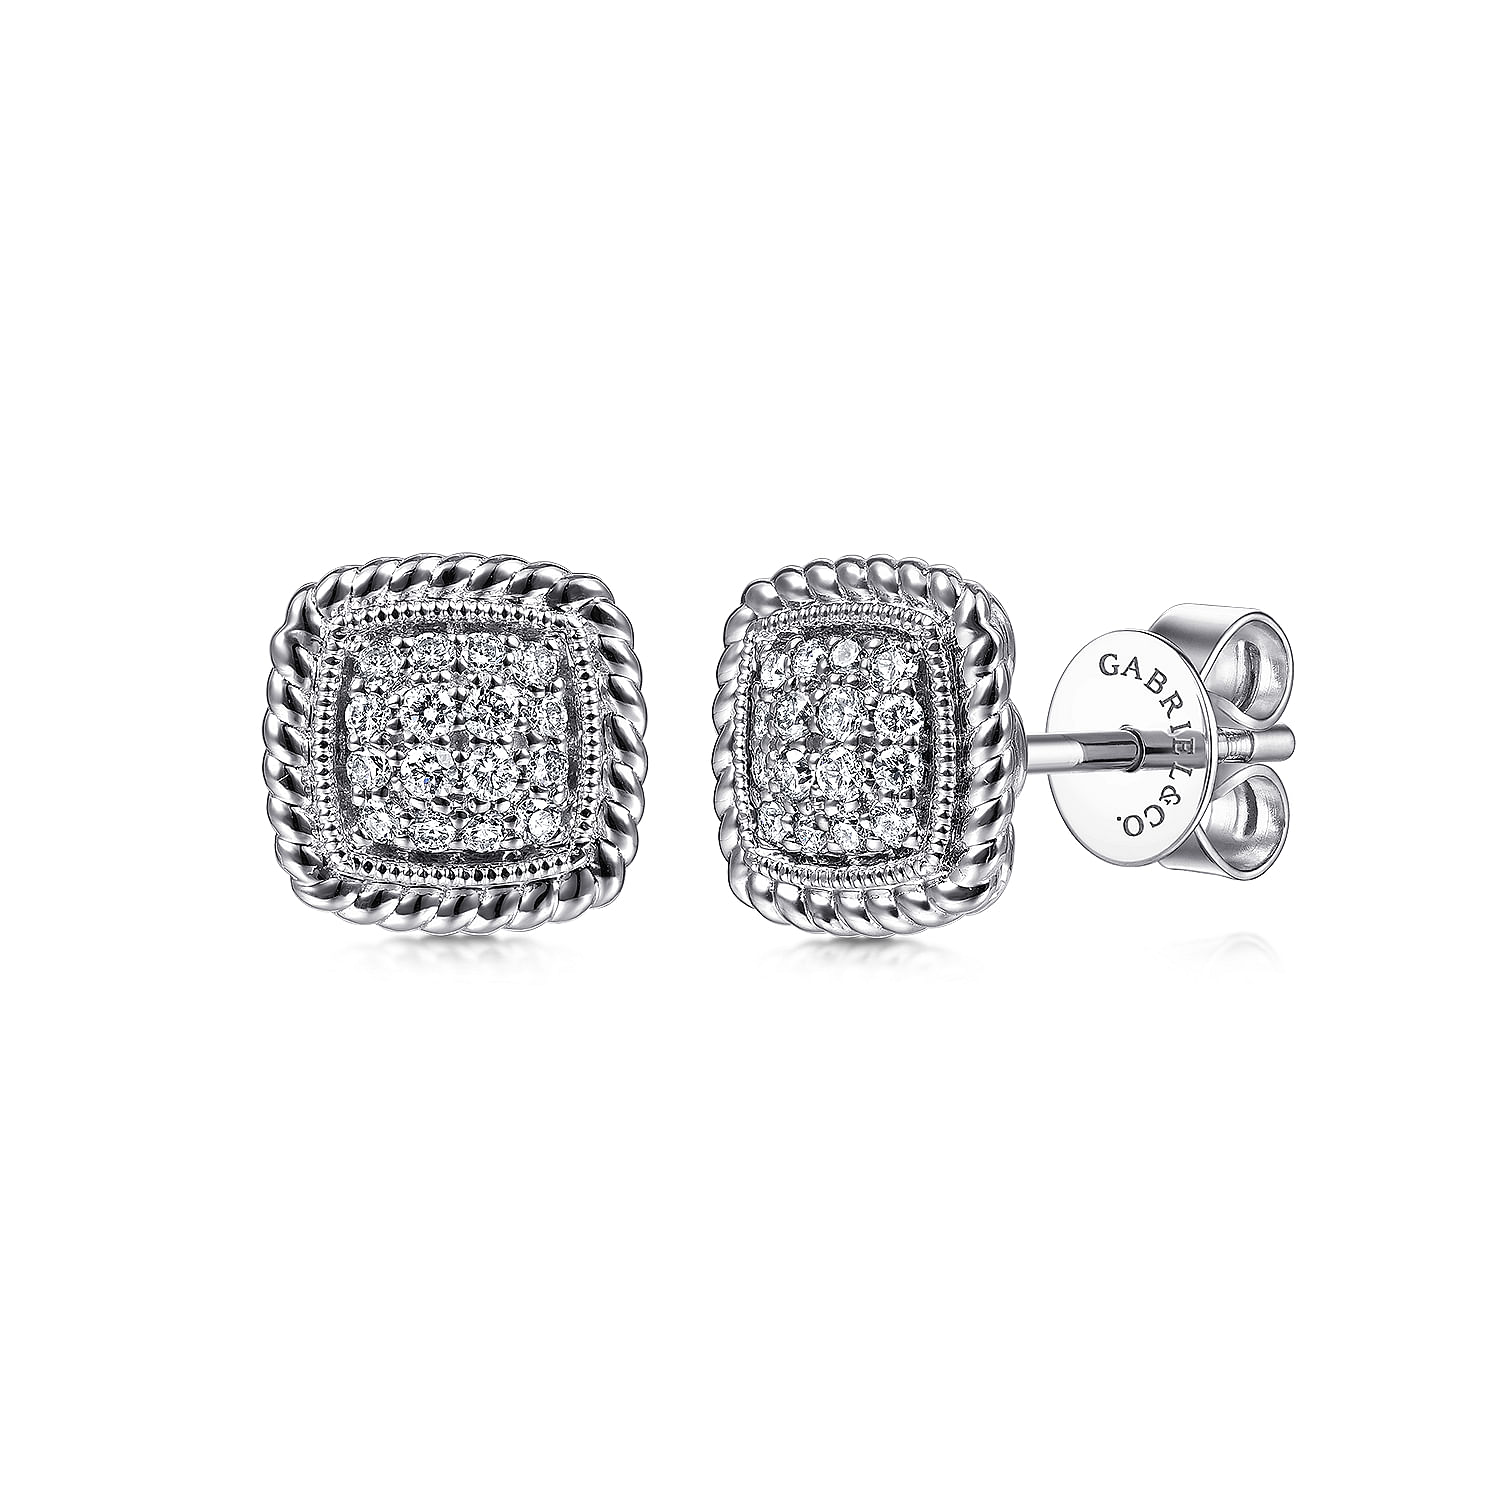 14K-White-Gold-Pave-Diamond-Stud-Earrings-with-Twisted-Rope-Frame1